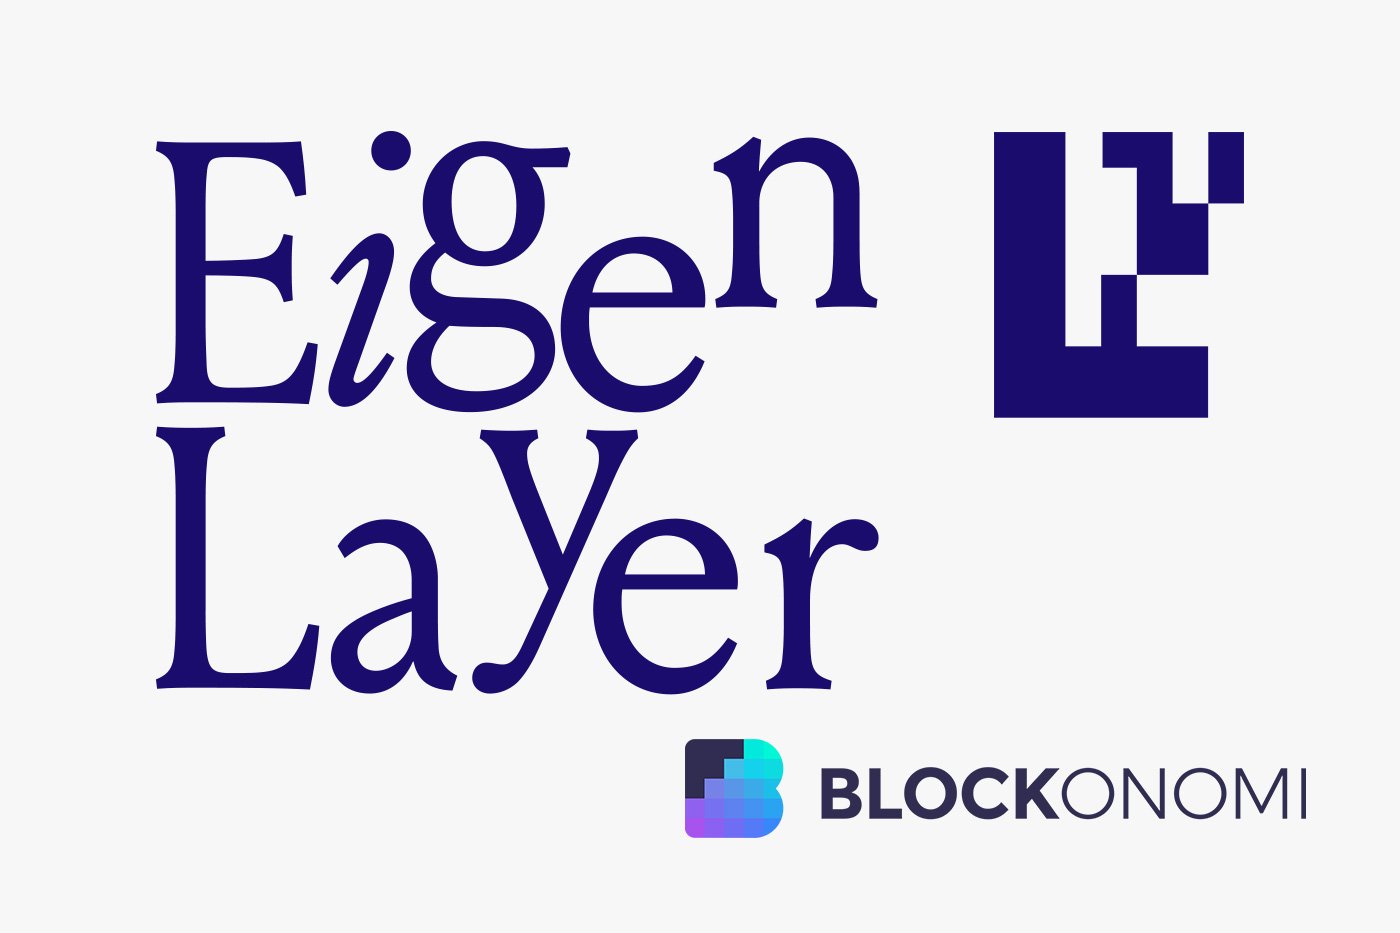 EigenLayer announces the launch of the native EIGEN token in May